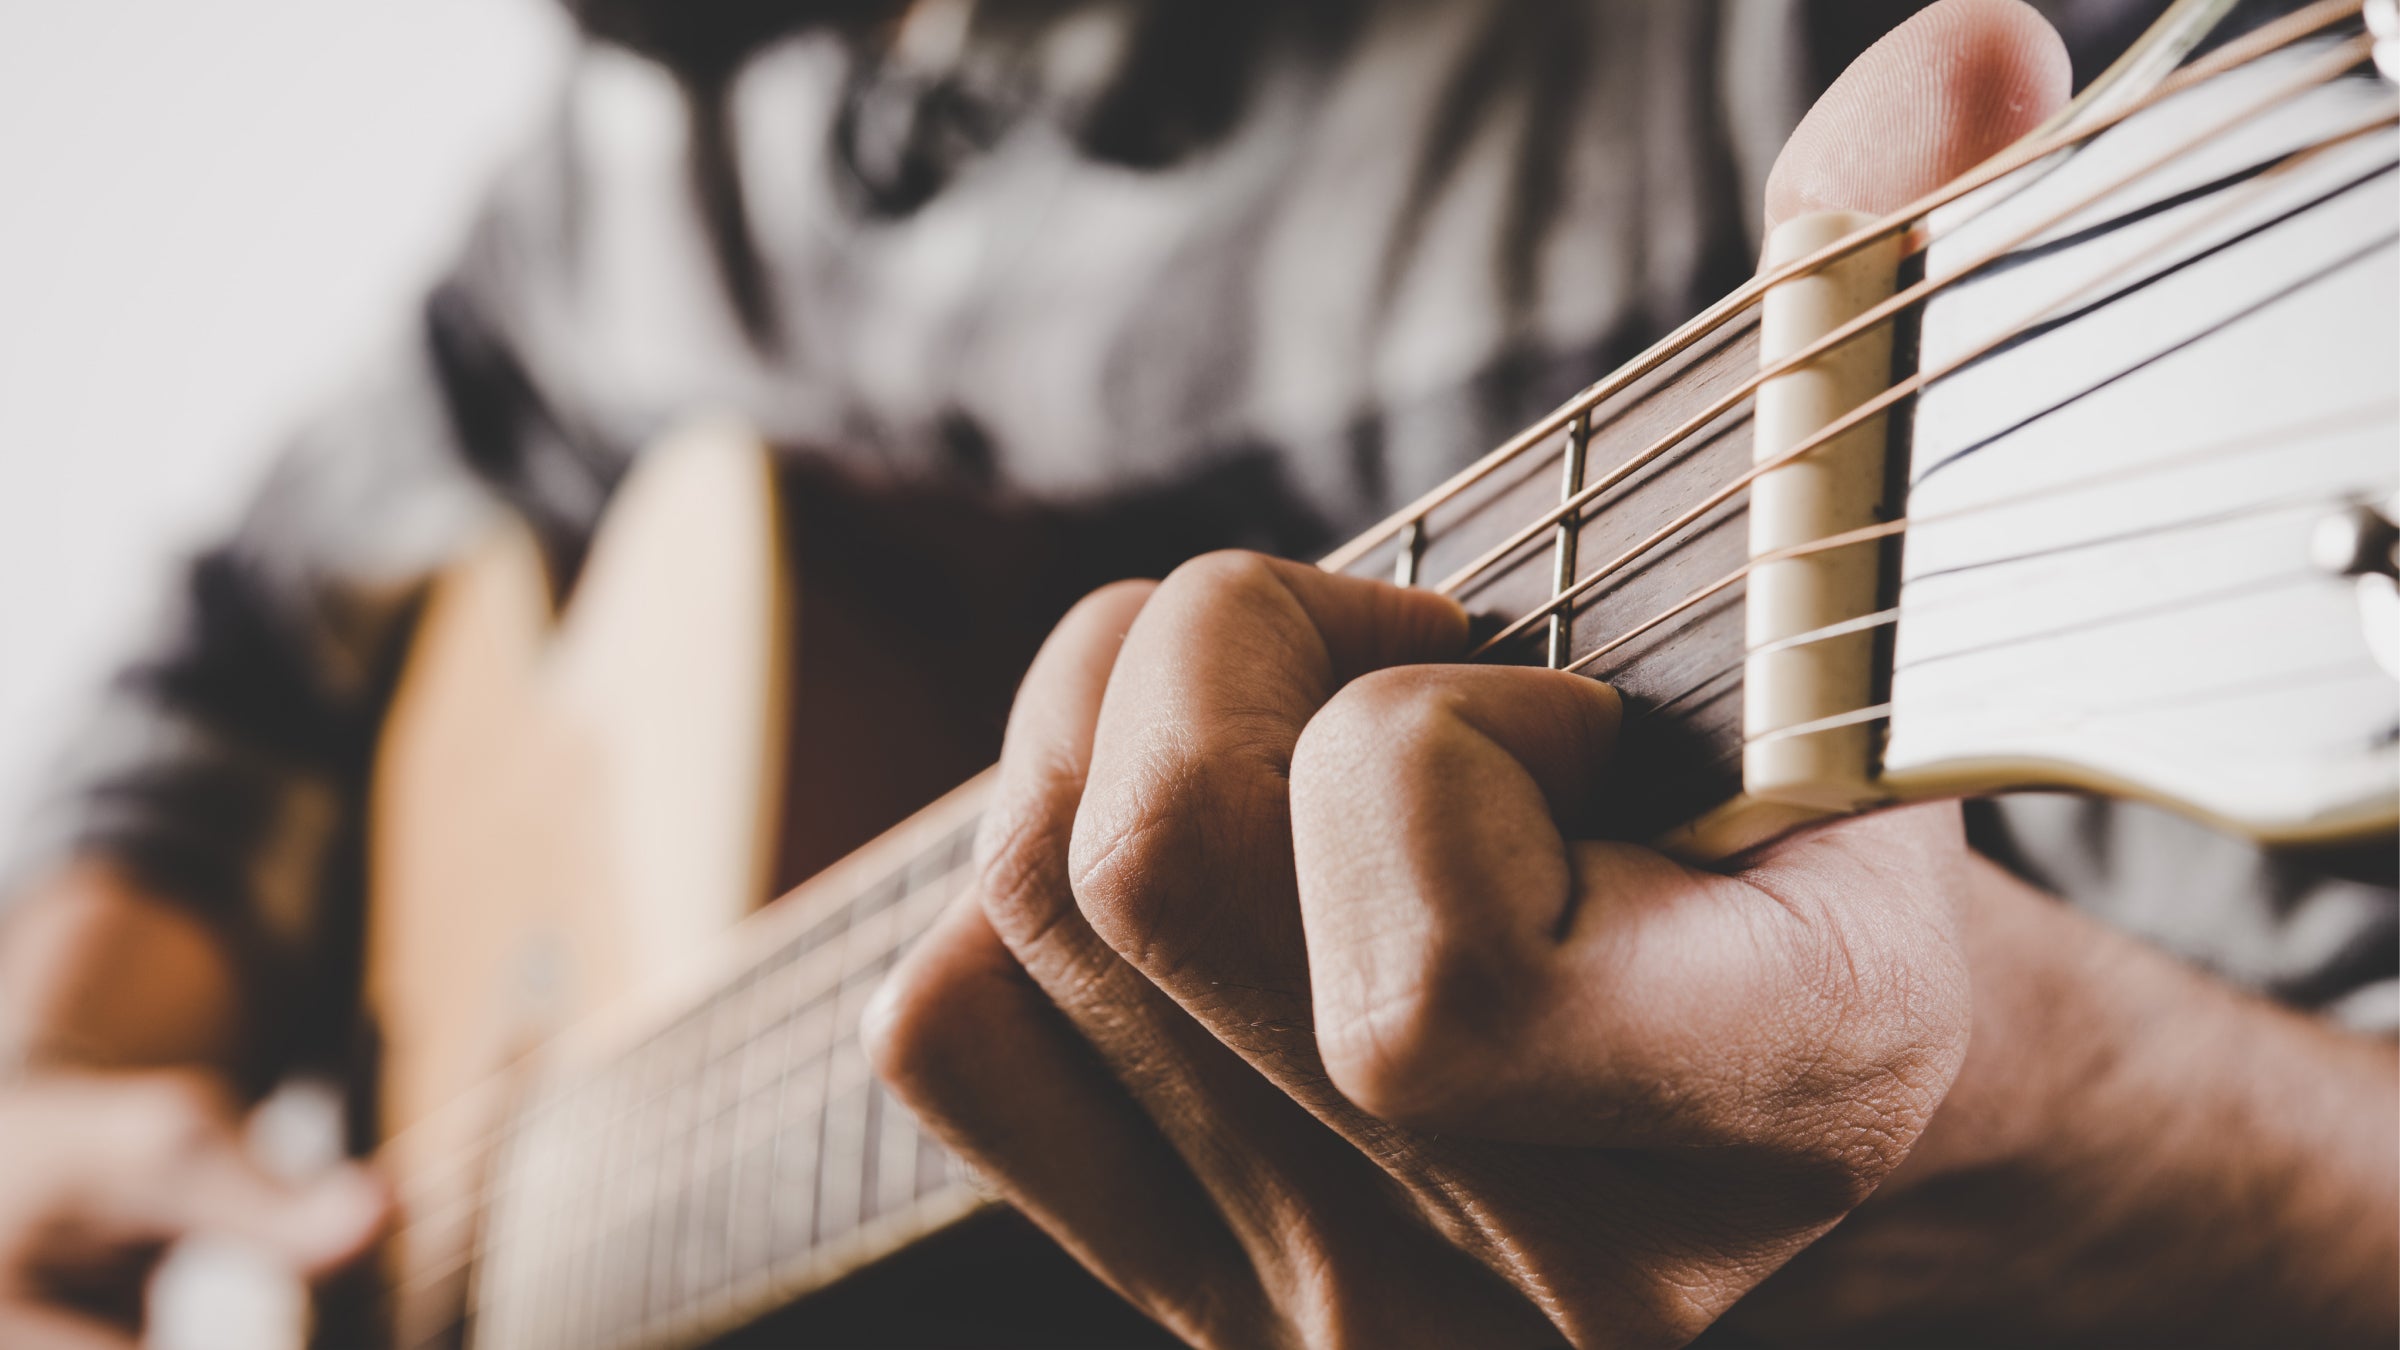 A close up of a person playing a guitar